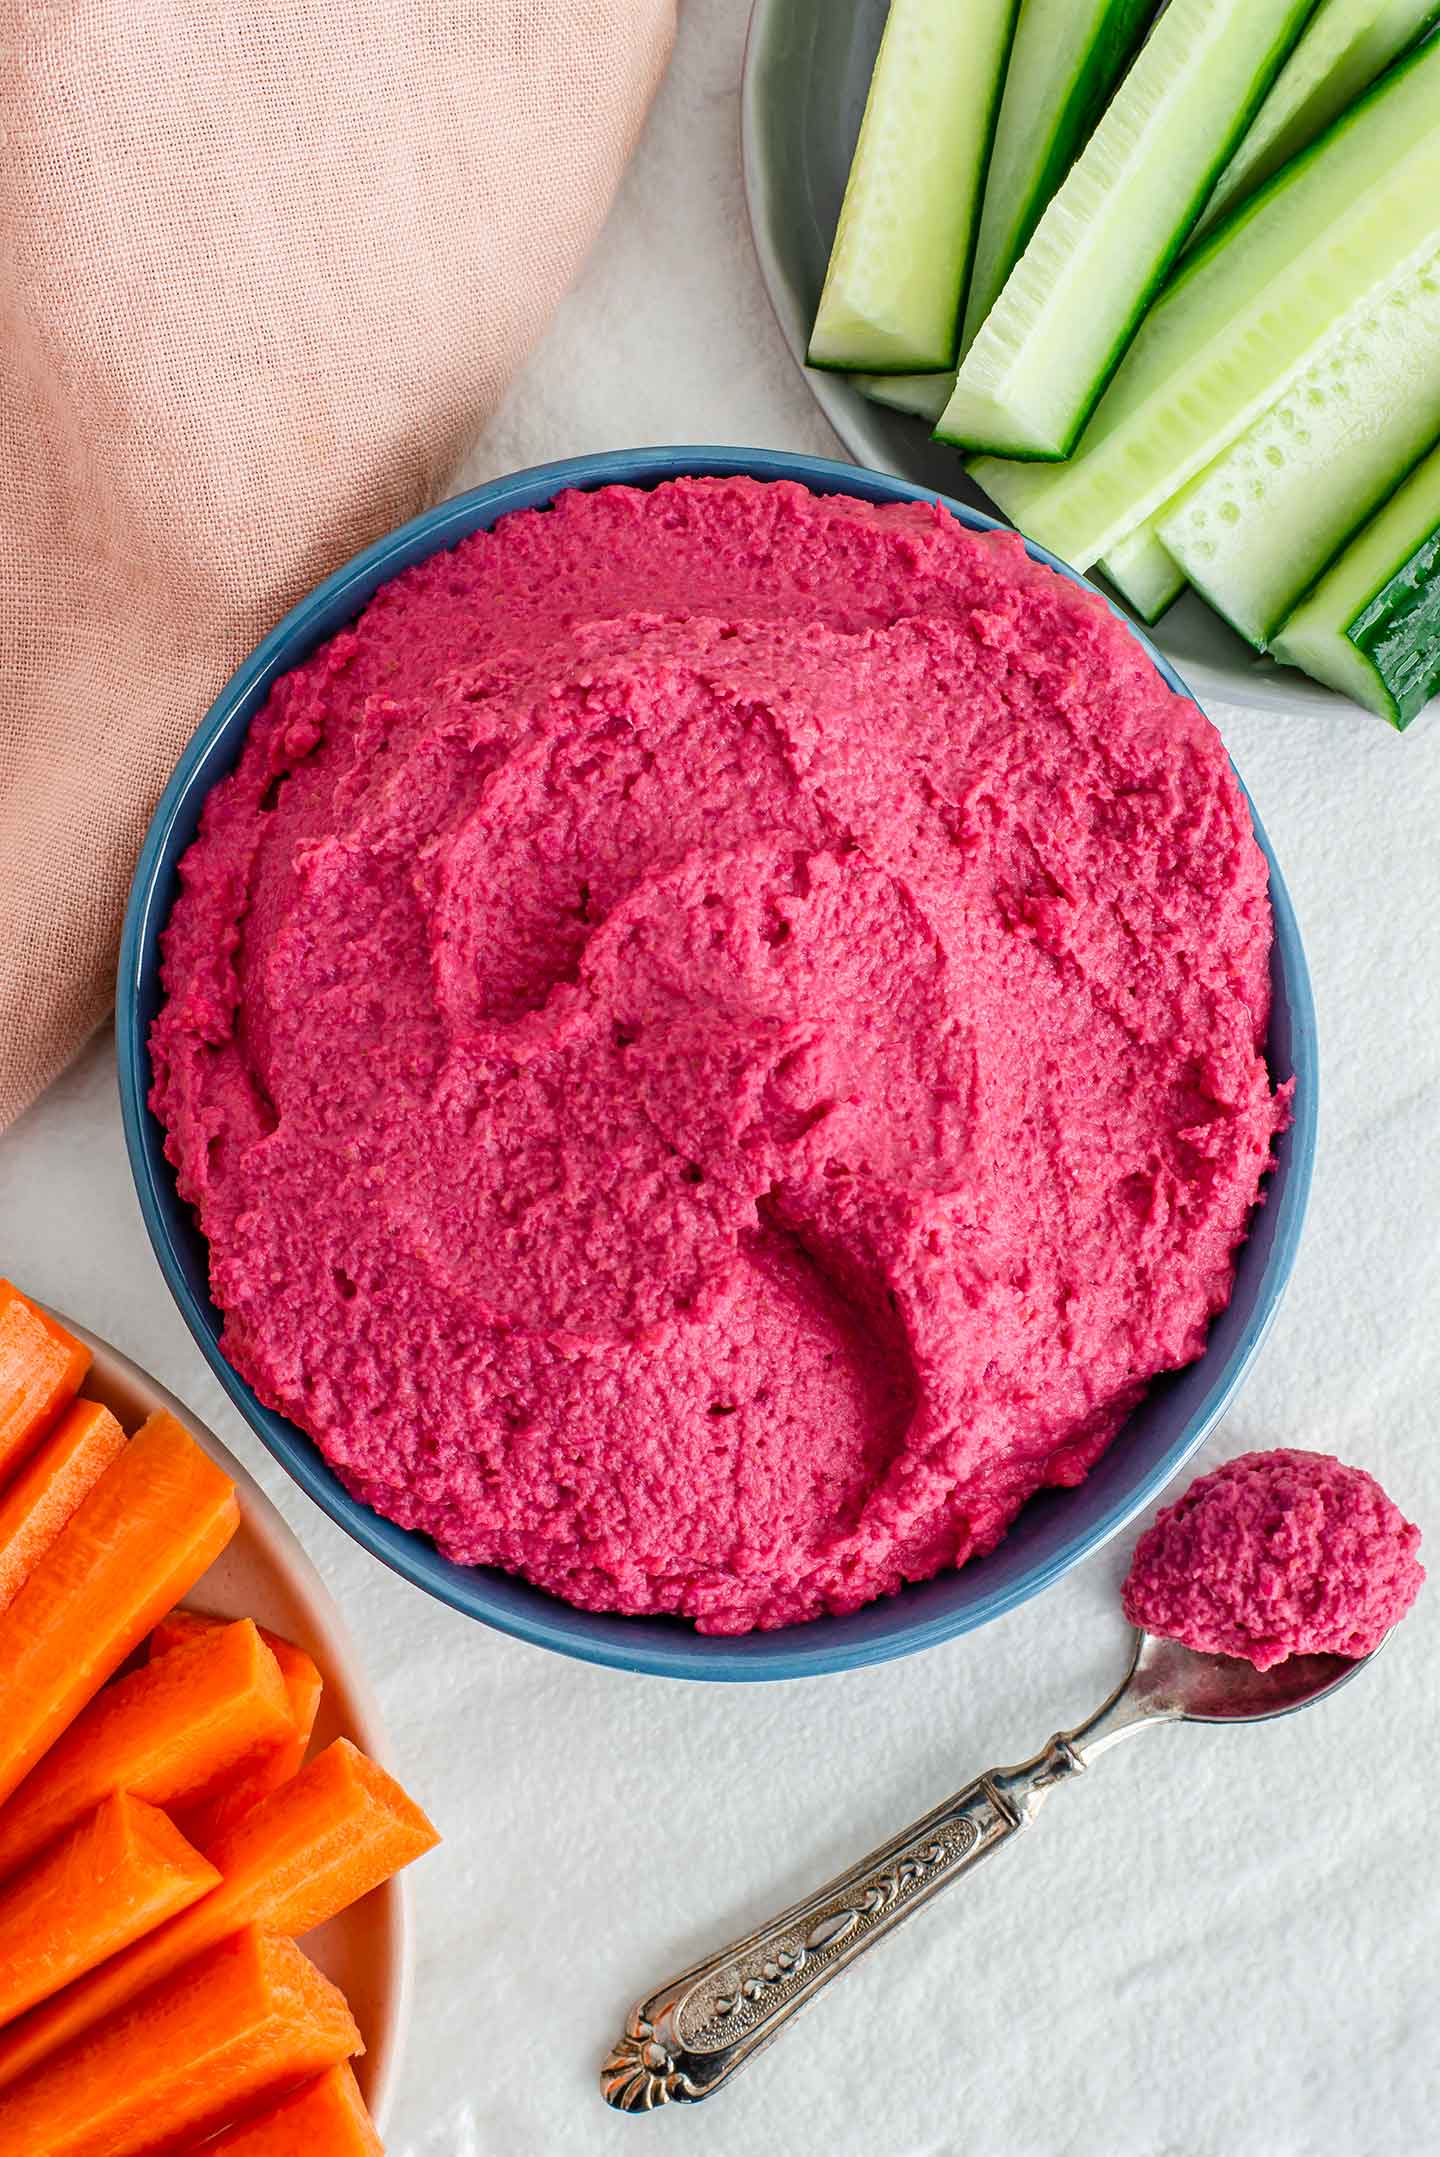 Top down view of a bowl filled with bright pink roasted beet hummus. Carrots and celery sticks surround the bowl.